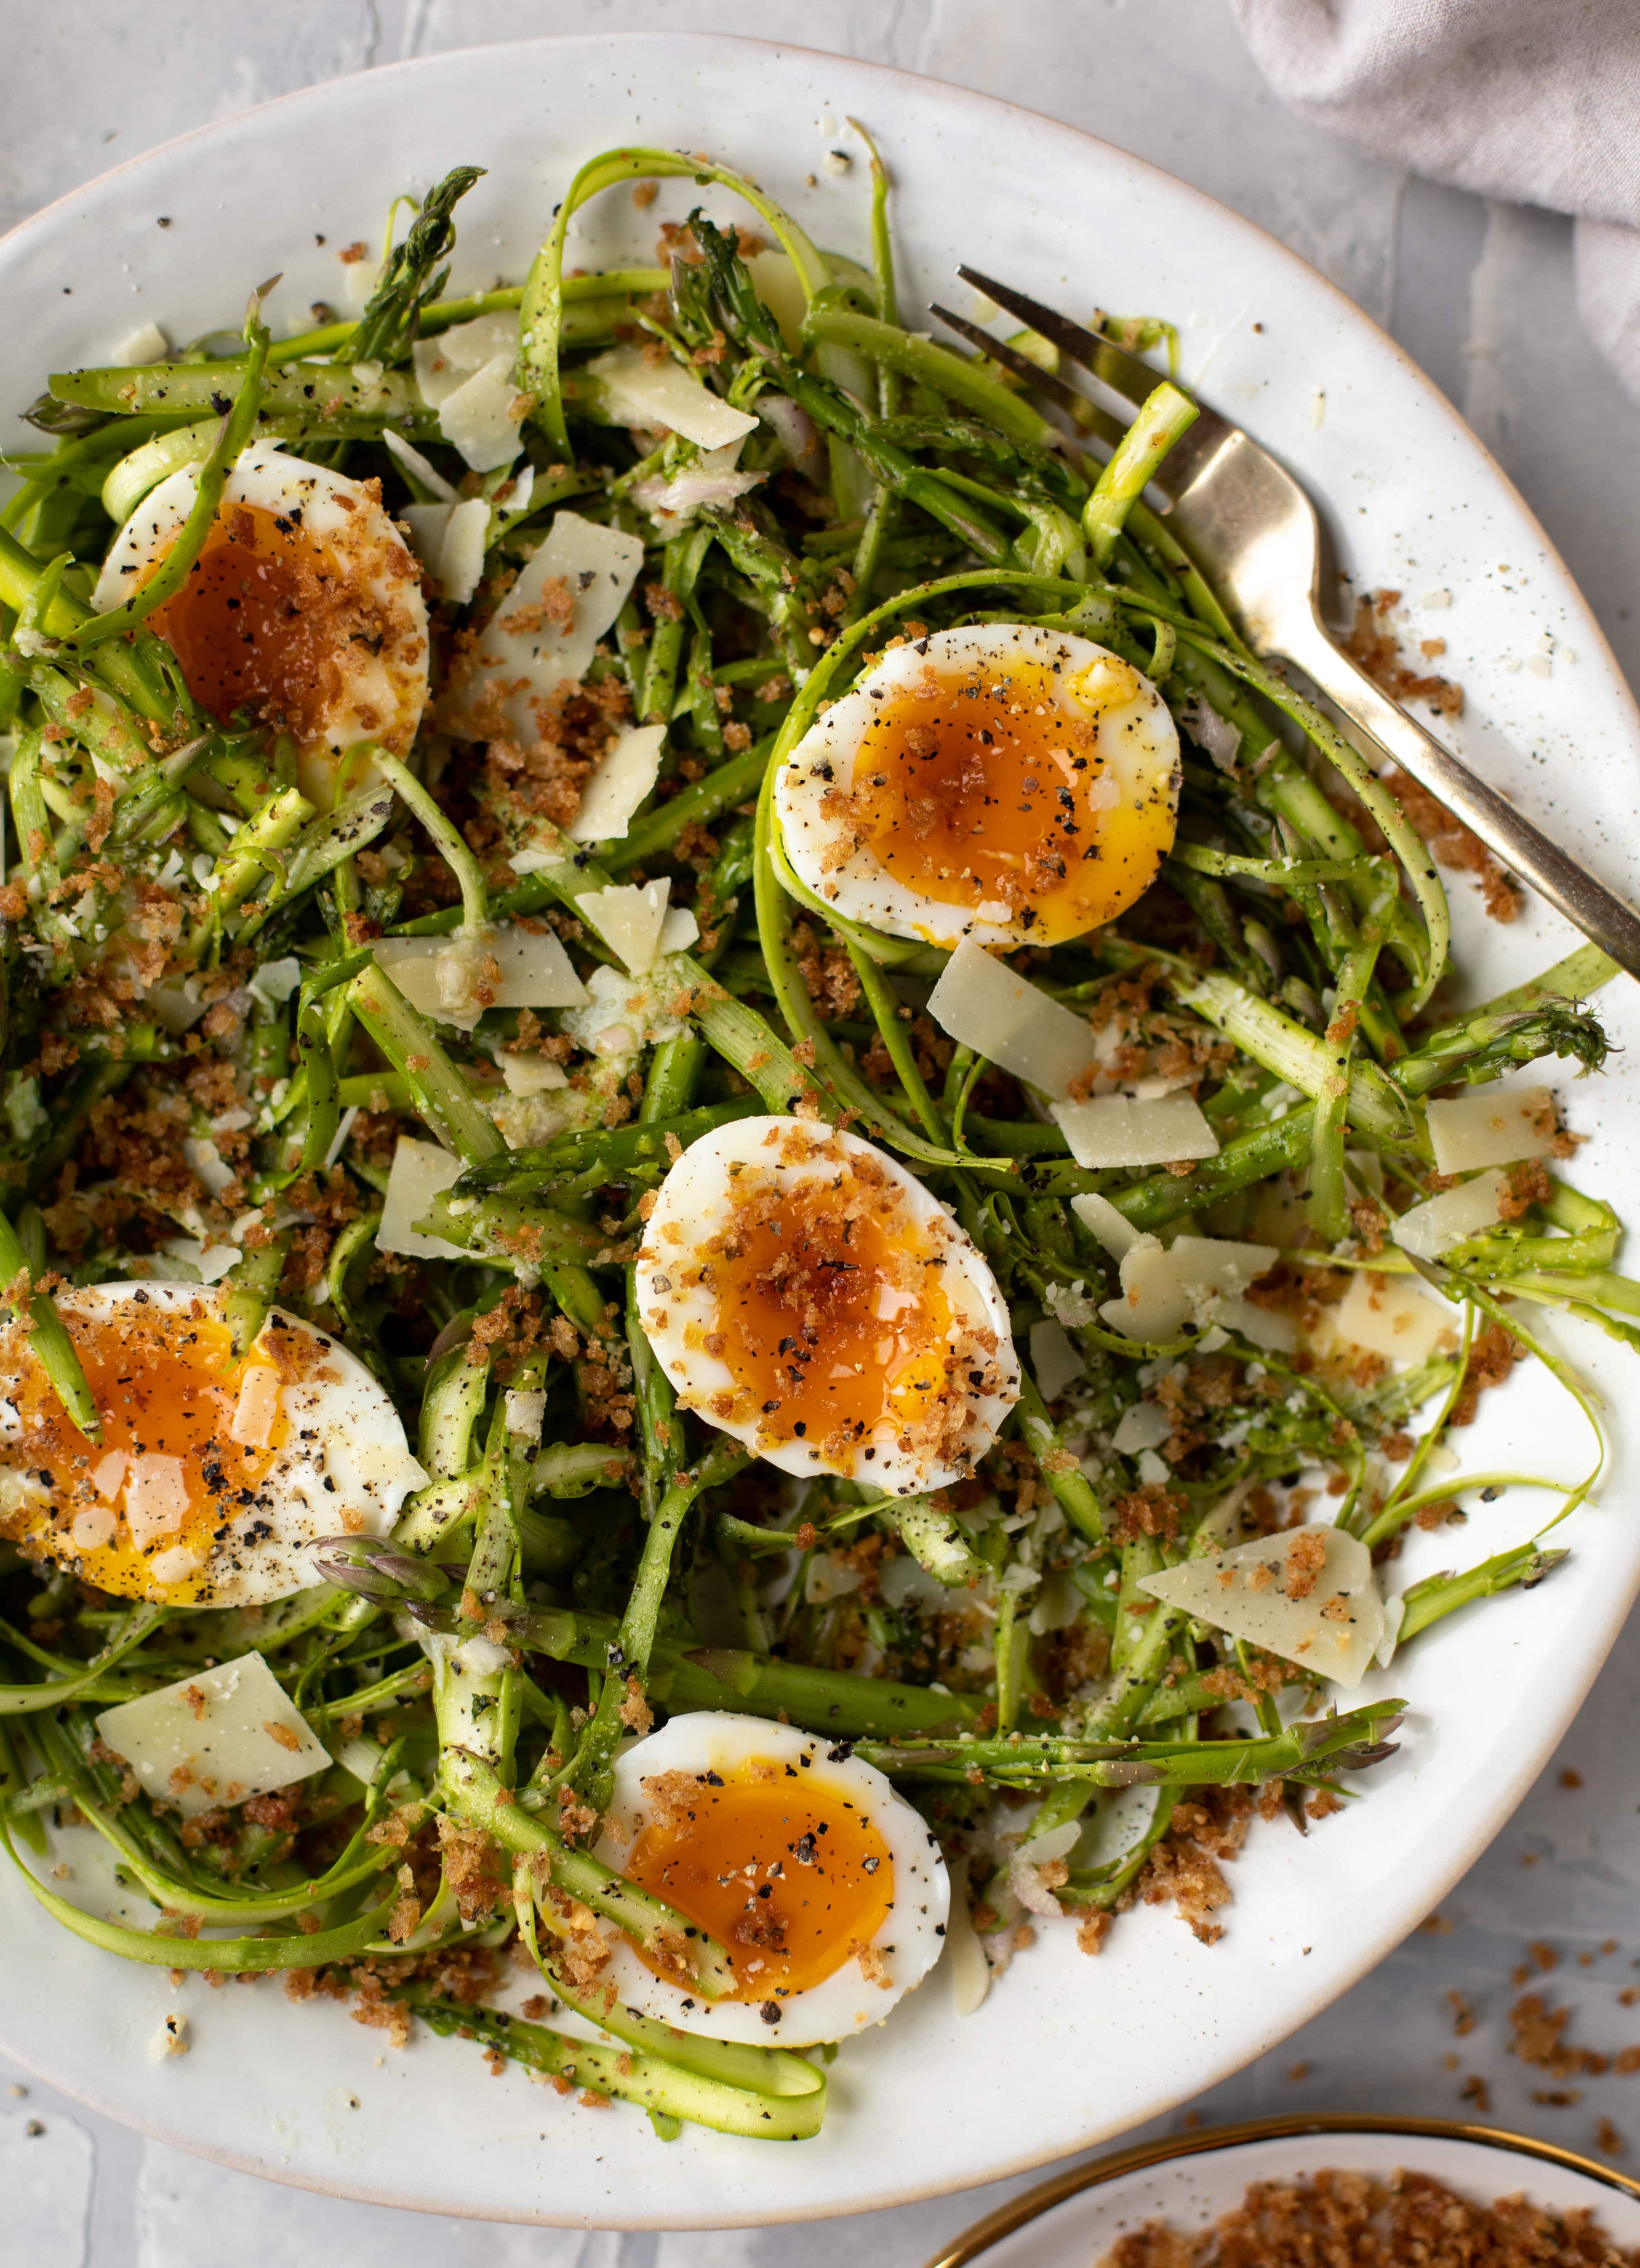 This shaved asparagus salad is tossed with a delicious parmesan vinaigrette, then topped with soft boiled eggs and finished with crunchy garlic breadcrumbs!